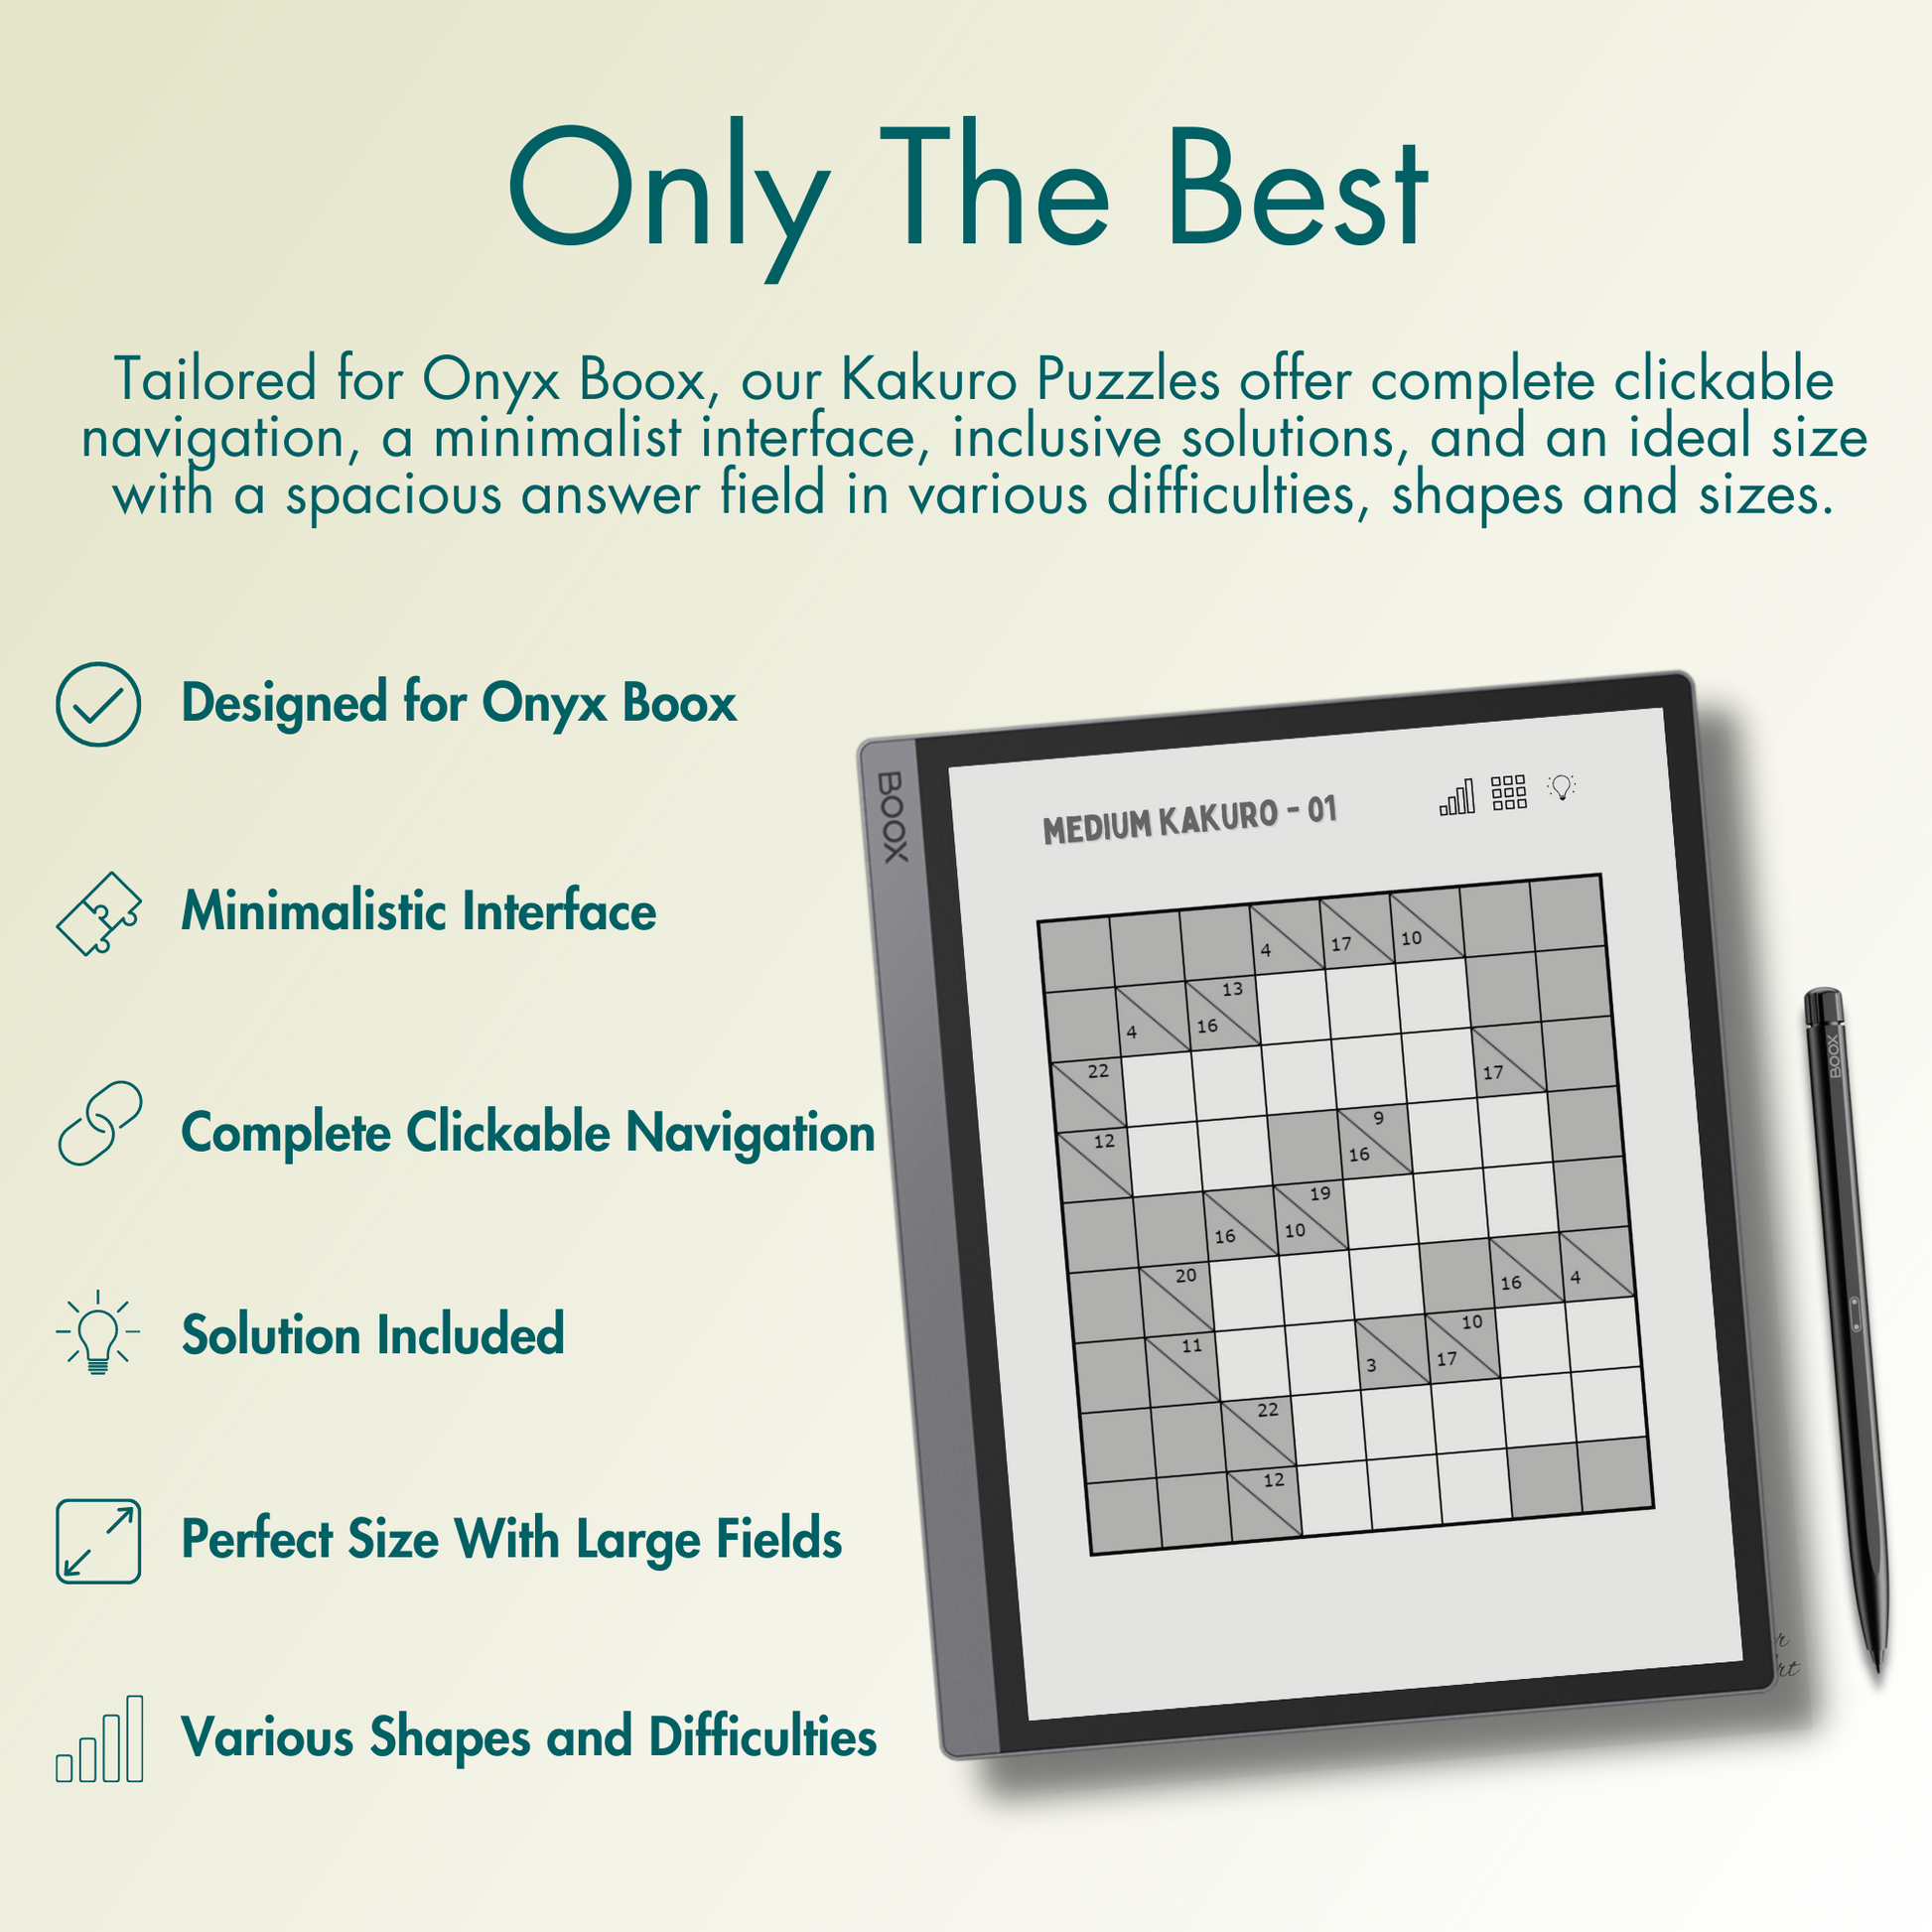 Our Kakuro Puzzles offer complete clickable navigation, a minimalist interface, inclusive solutions, and an ideal size with a spacious answer field for Onyx Boox E-Ink screen.